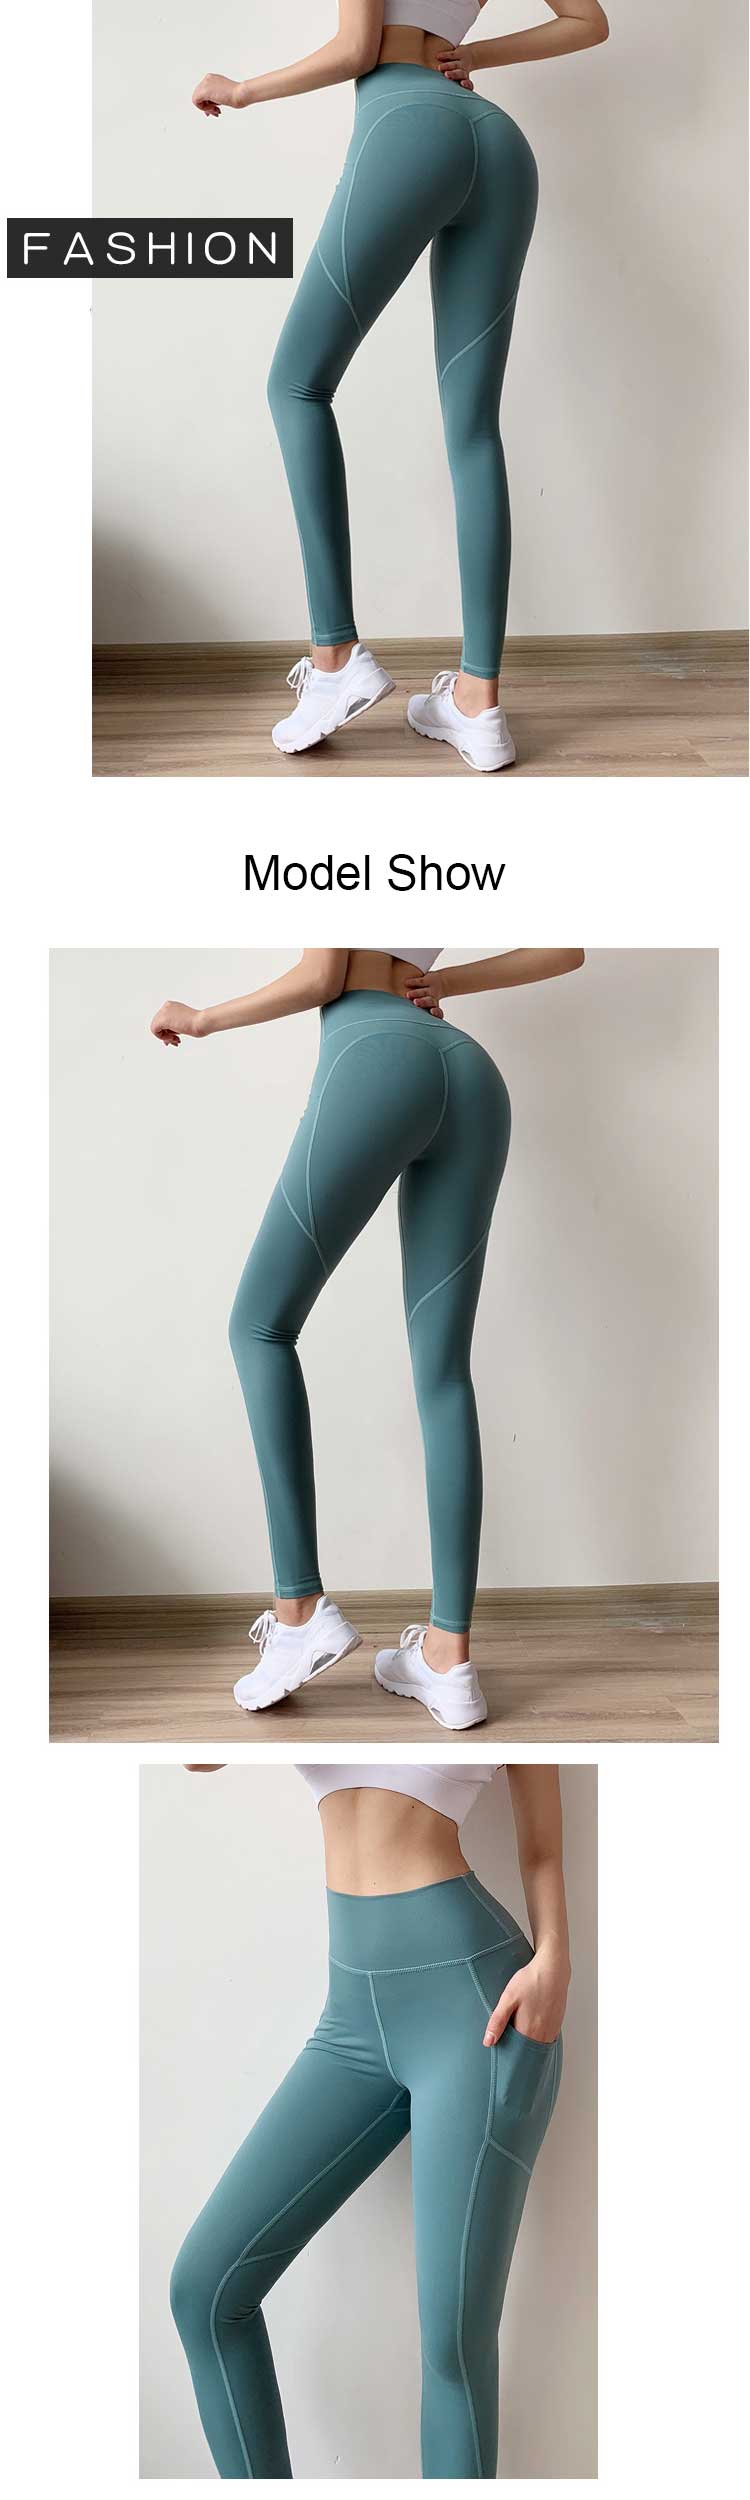 This-style-of-sport-tights-high-waist-is-designed-with-a-wide-waist